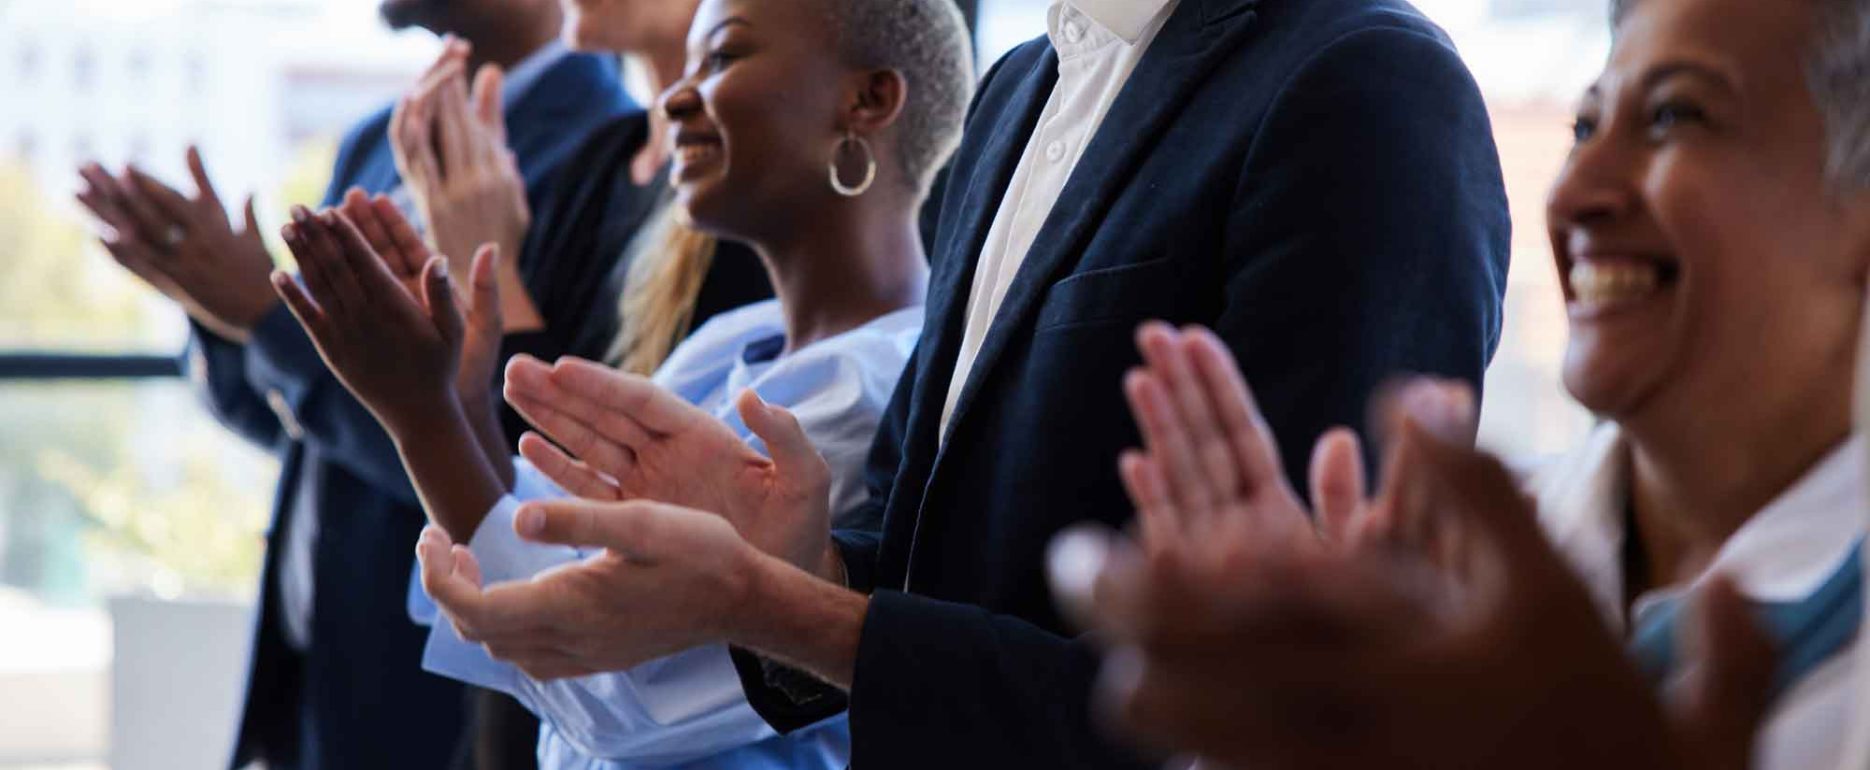 group of smiling businesspeople clapping after a presentation